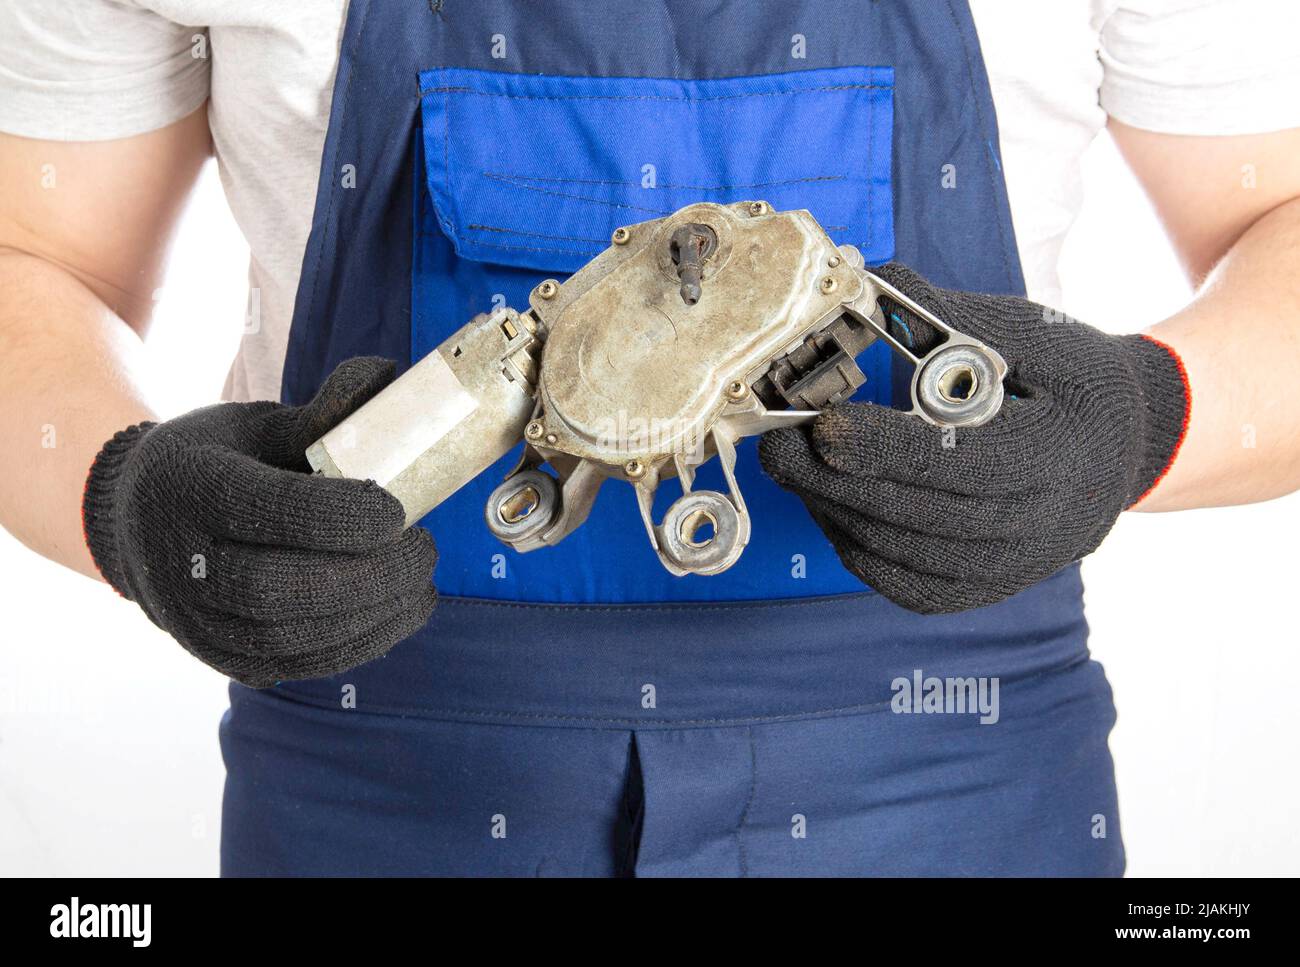 A car mechanic holds a broken electric windshield wiper motor in his hands against the background of a blue overalls. Repair and replacement of car pa Stock Photo